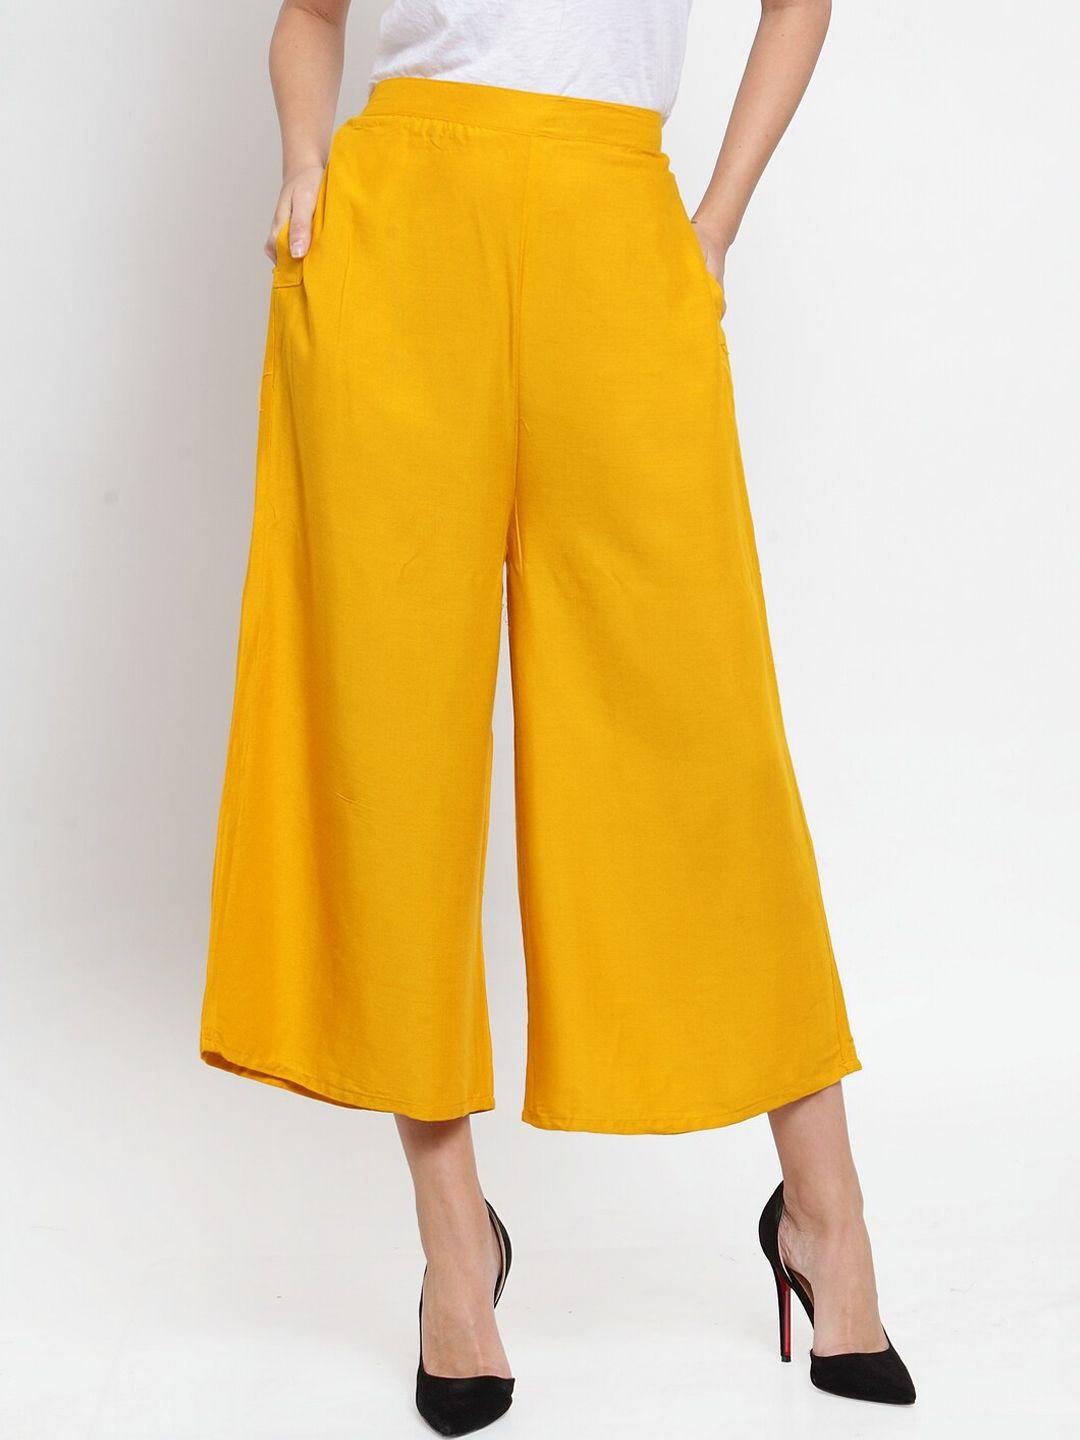 clora creation women smart easy wash mid-rise culottes trousers